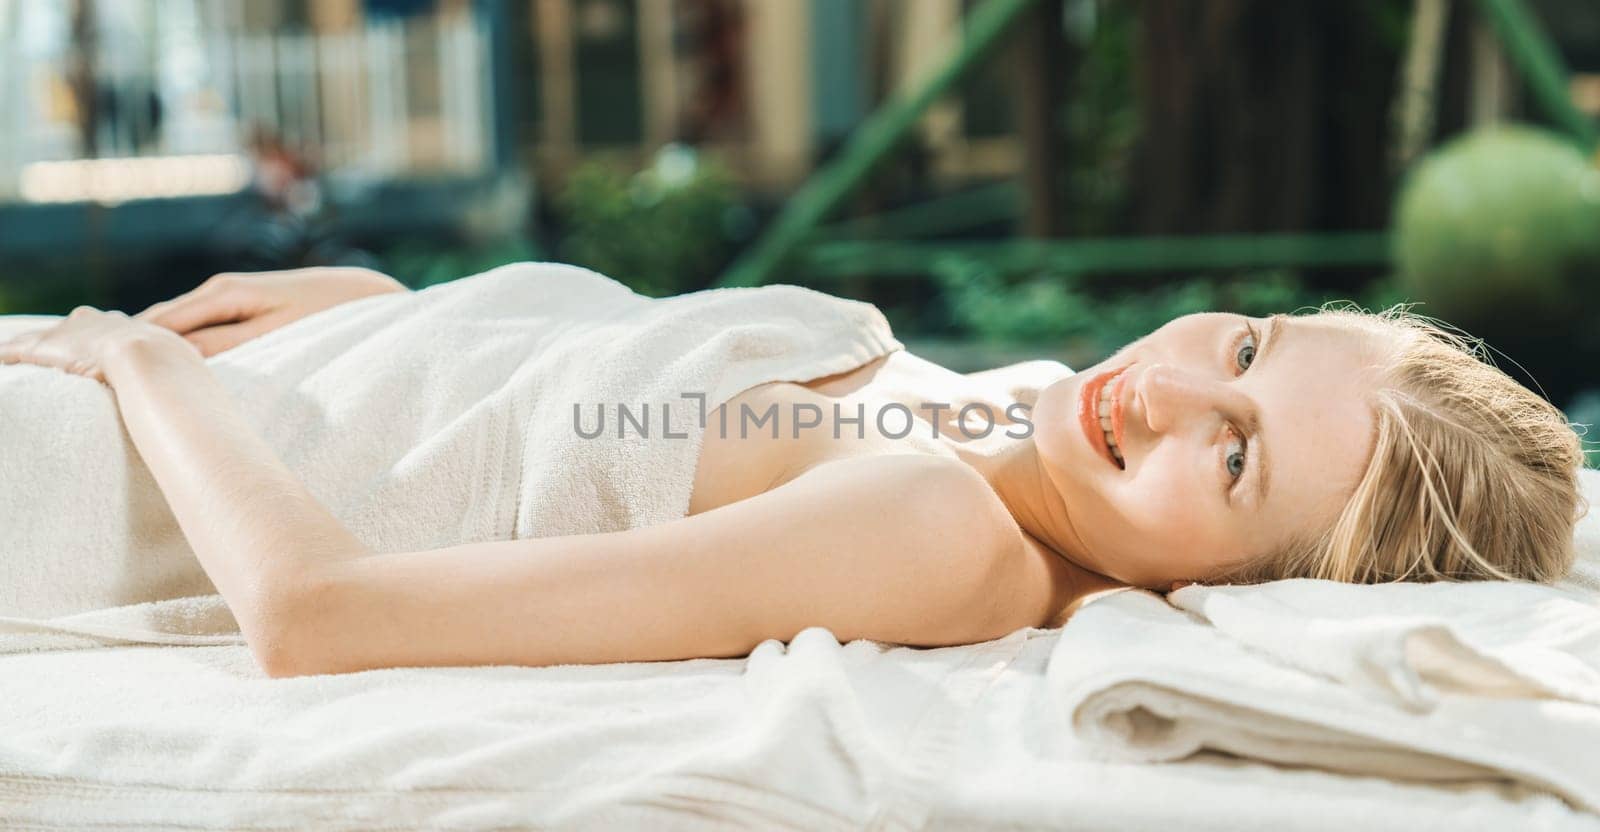 Beautiful young woman relaxes on a spa bed surrounded by nature. Tranquility by biancoblue